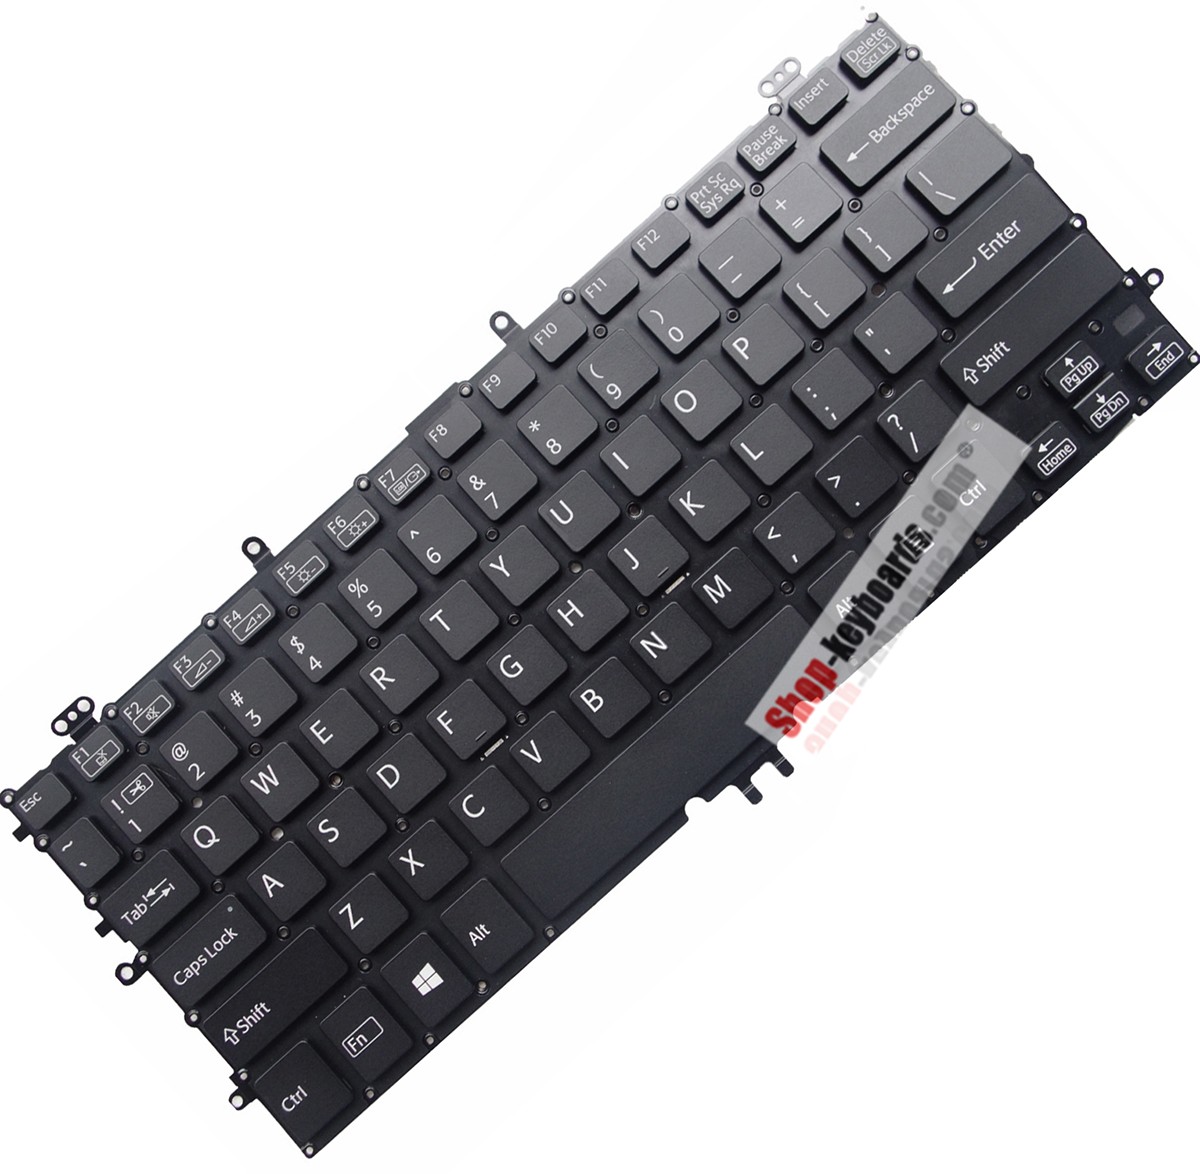 Sony VAIO SVF11N12CAS Keyboard replacement